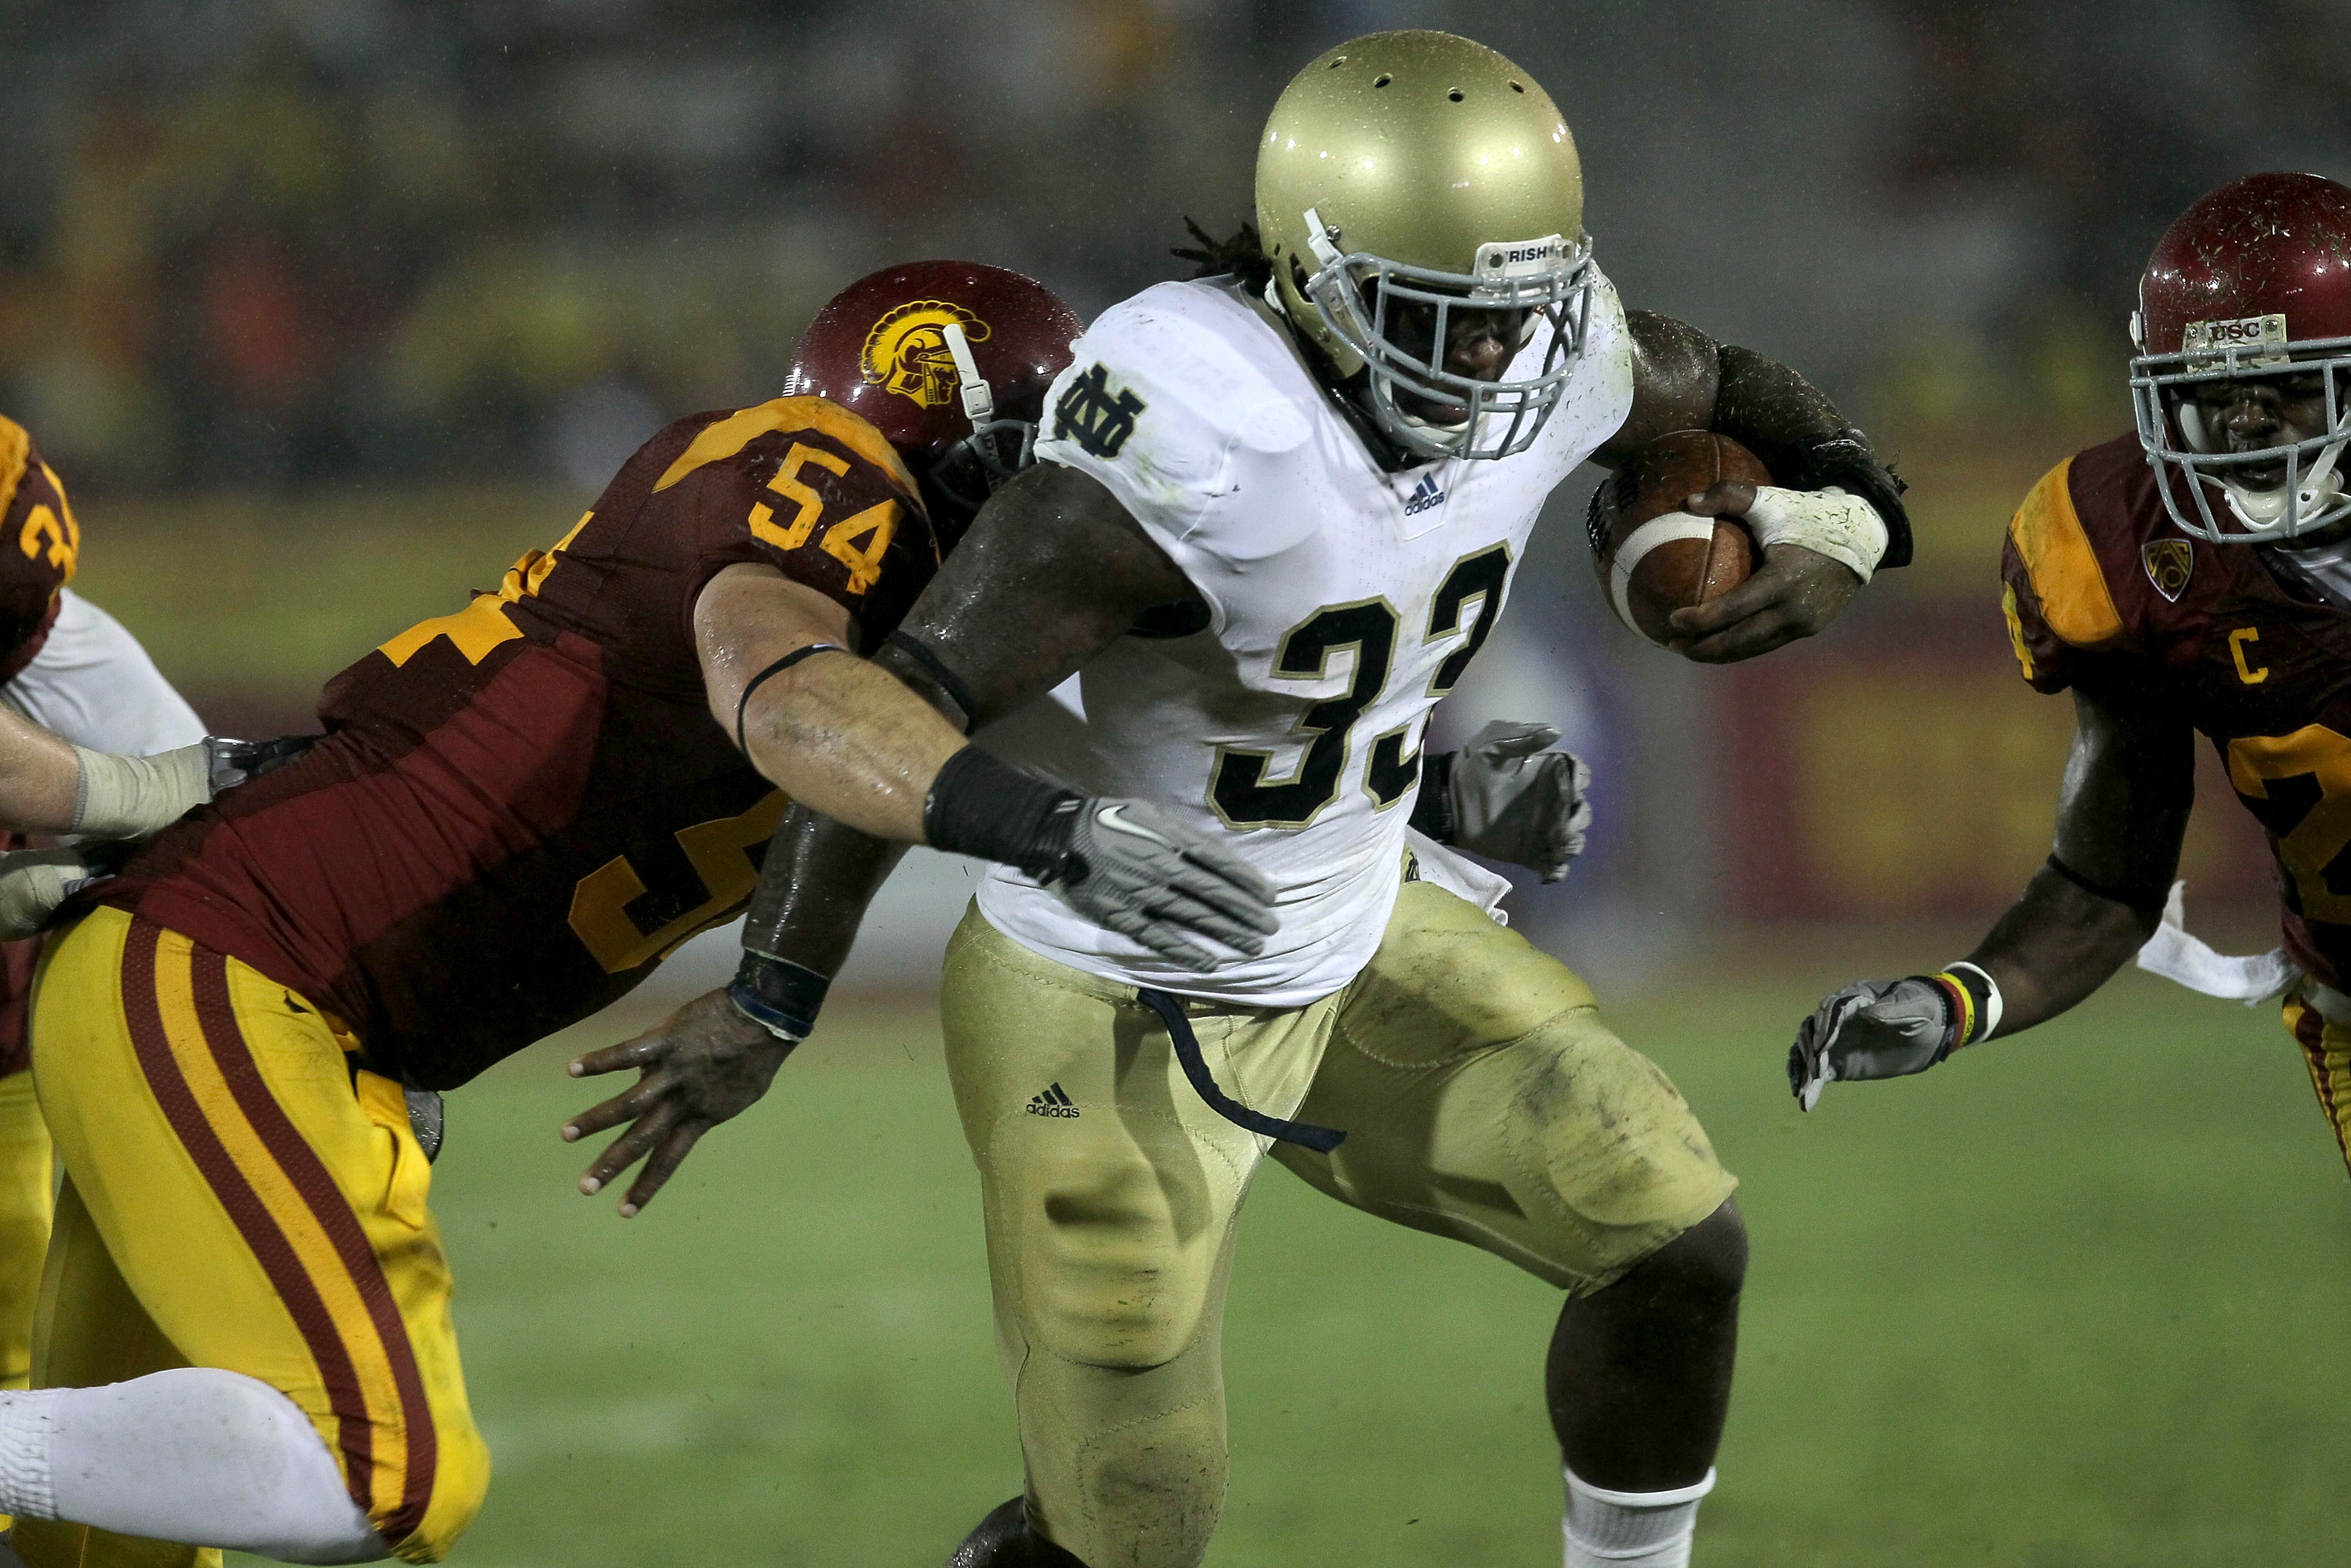 LOS ANGELES, CA - NOVEMBER 27:  Running back Robert Hughes #33 of the Notre Dame Fighting Irish carries the ball against linebacker Chris Galippo #54 of the USC Trojans at the Los Angeles Memorial Coliseum on November 27, 2010 in Los Angeles, California.